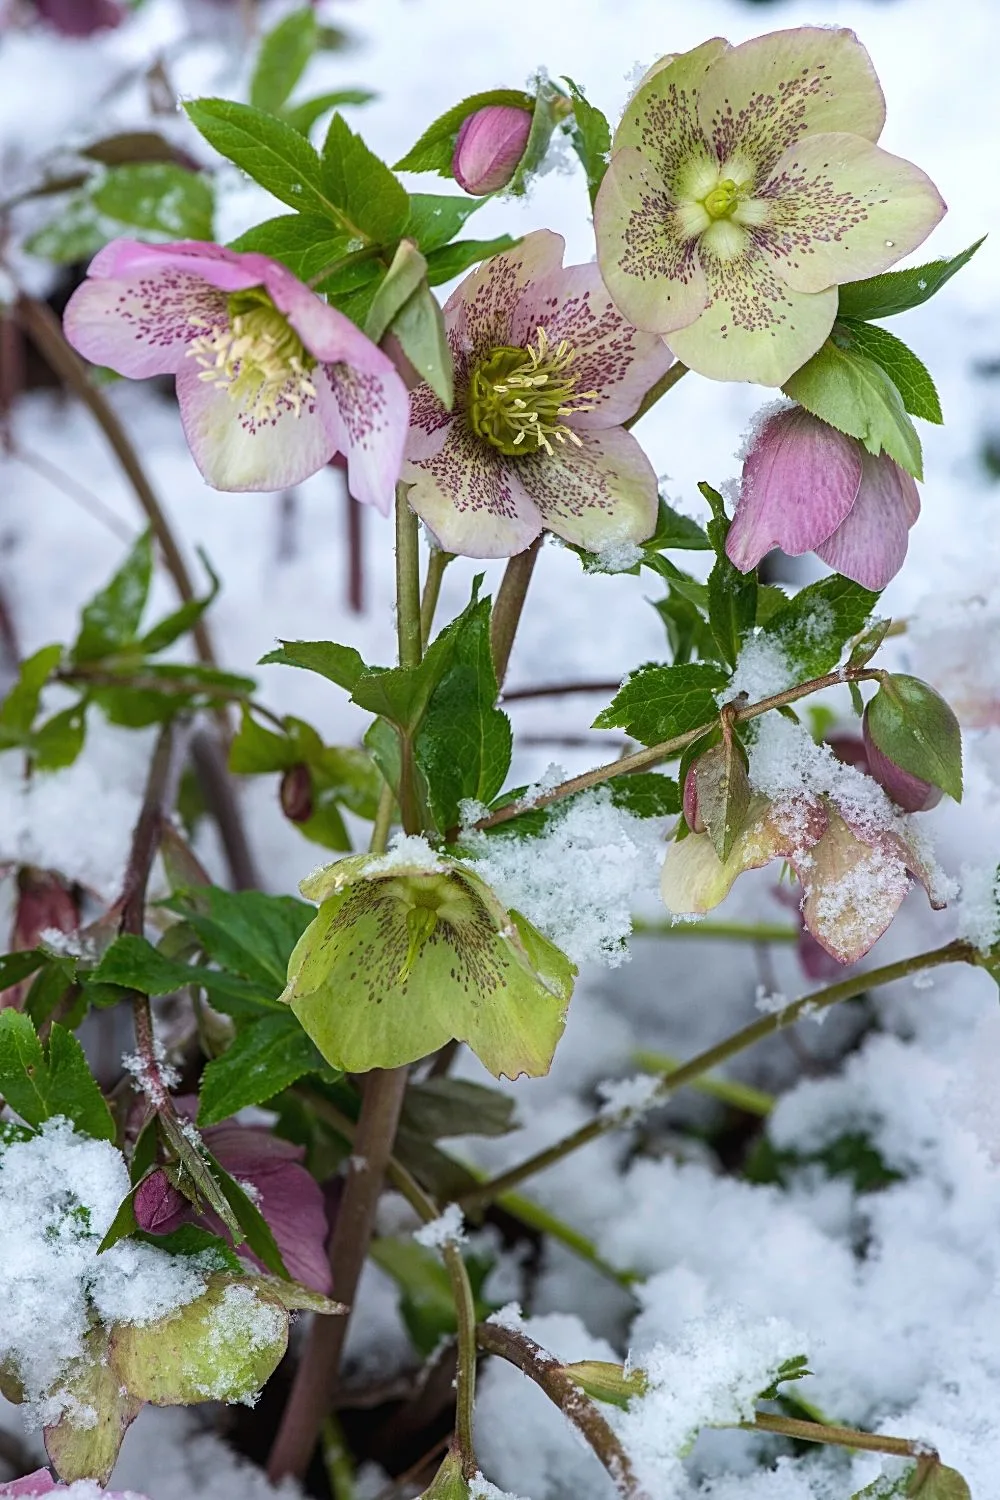 Hybrid Lenten Rose loves the shade that the east-facing side of the house provides